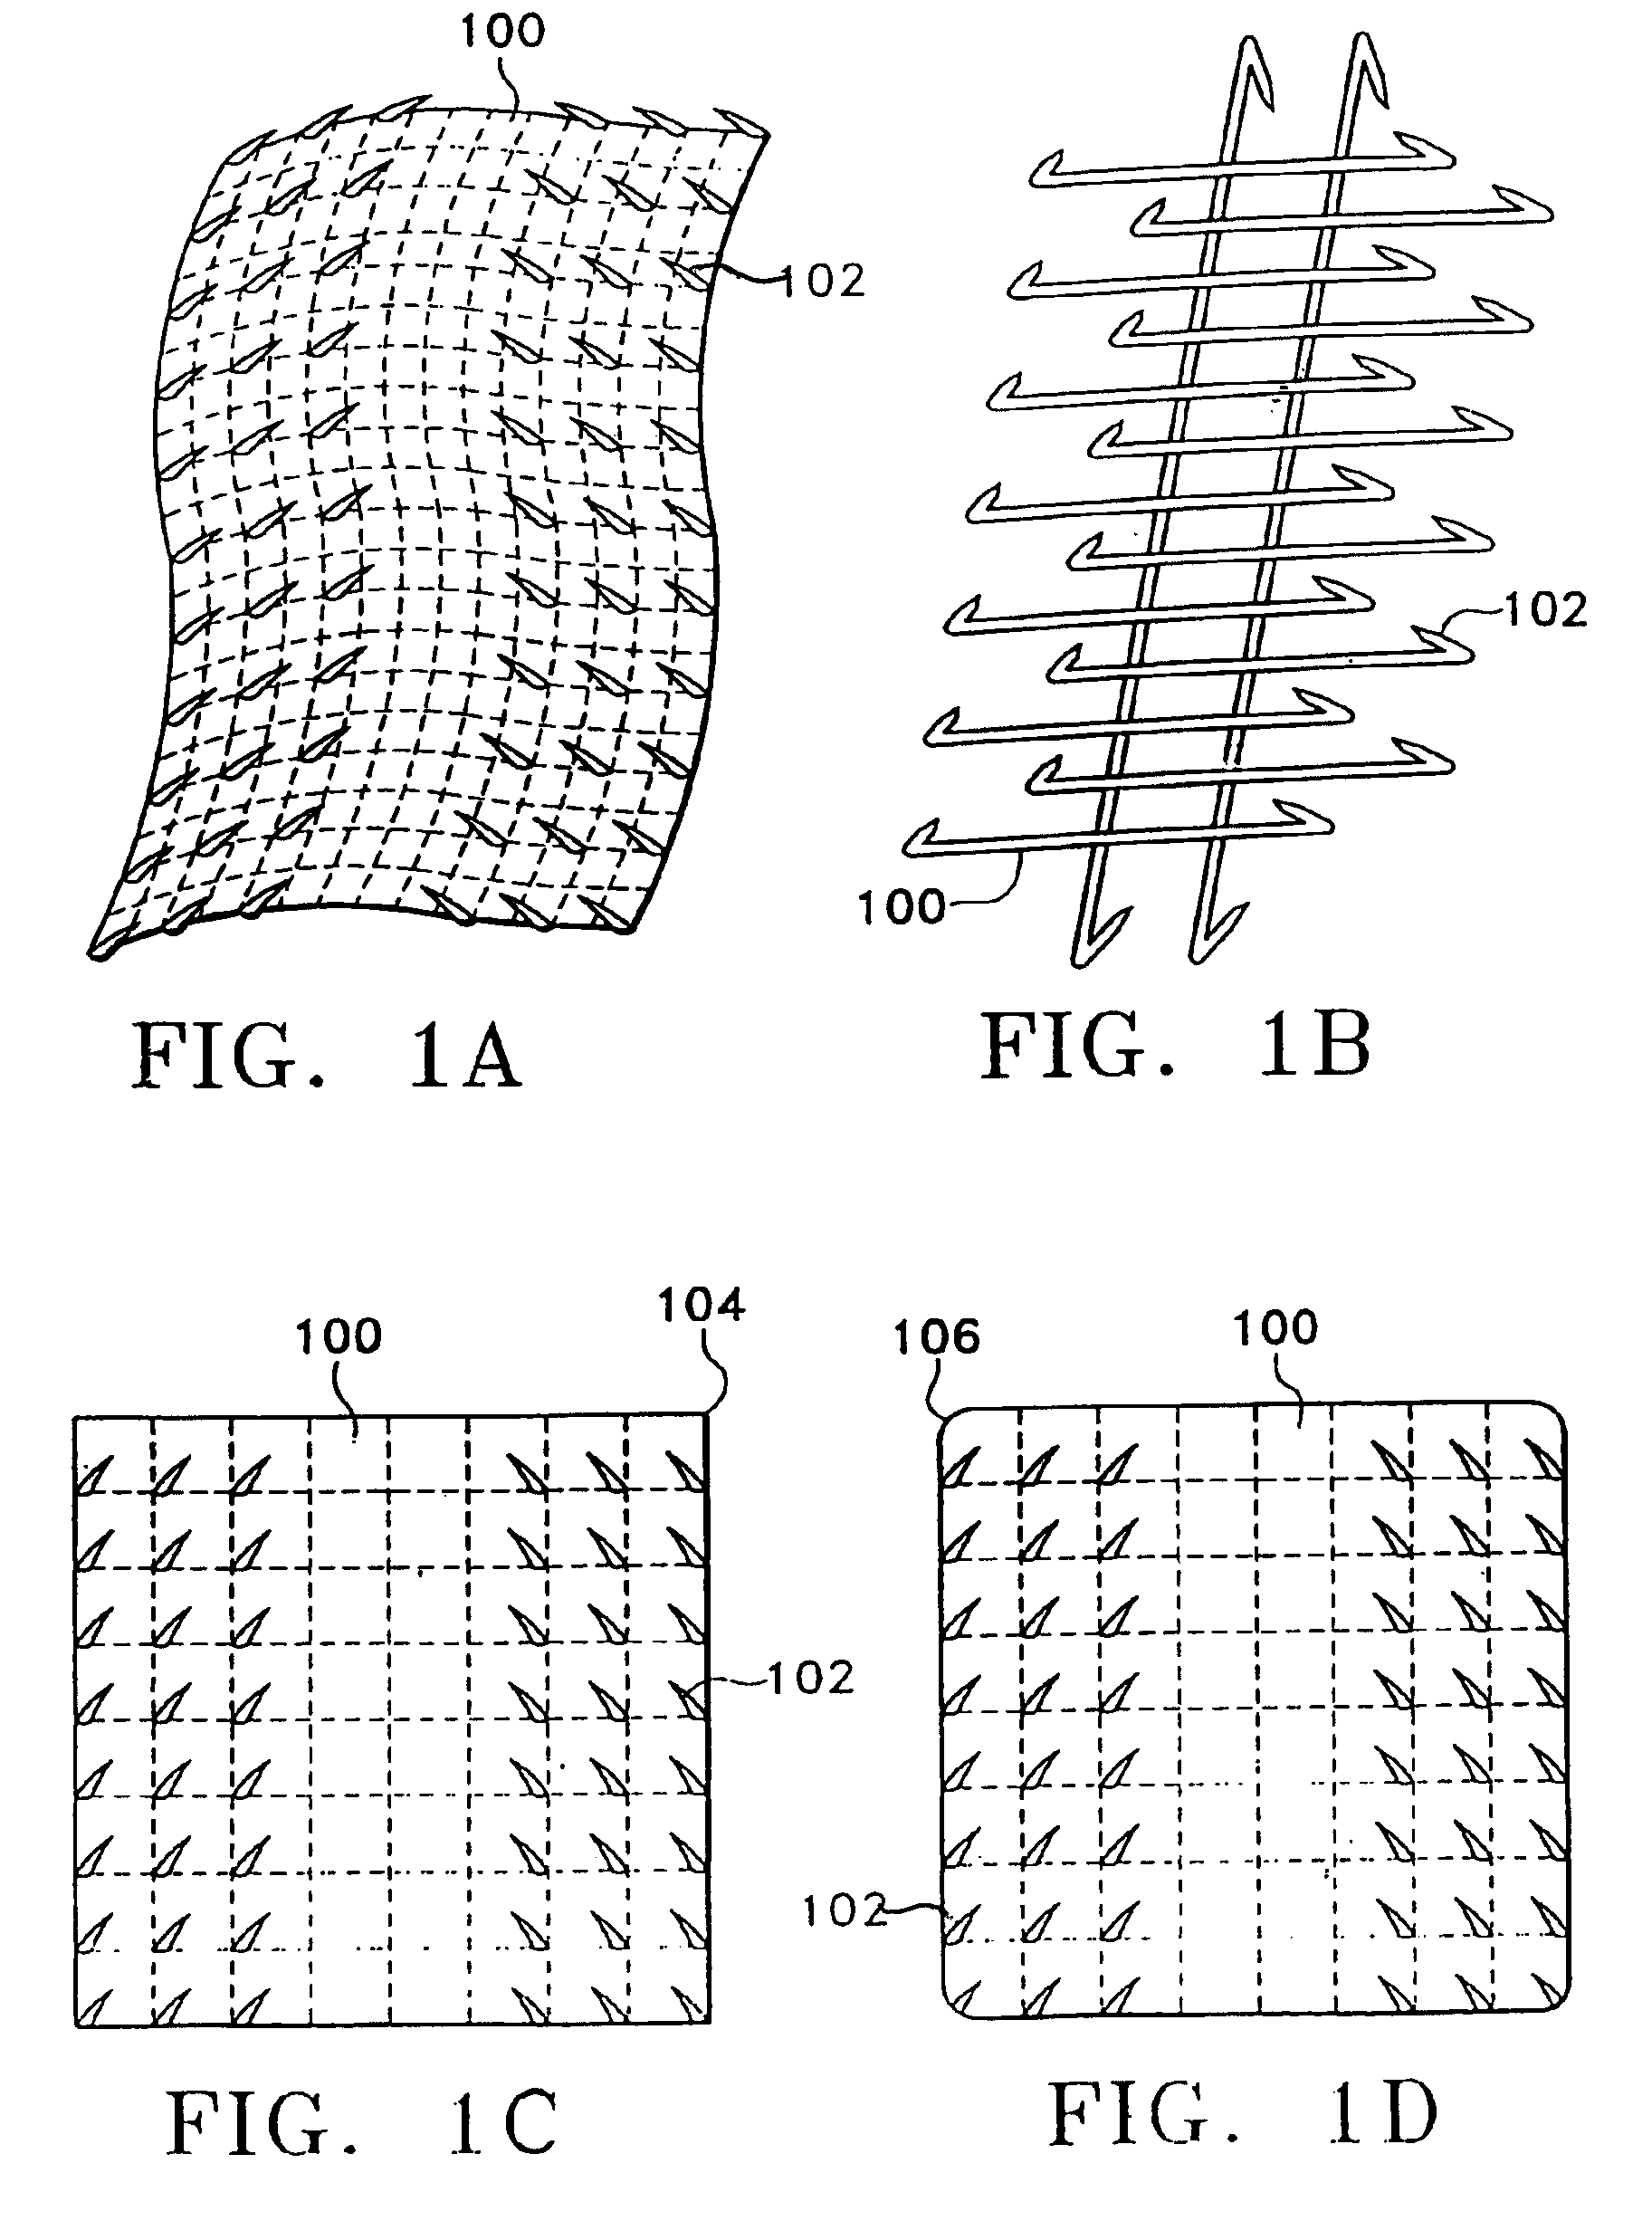 Multi-point tension distribution system device and method of tissue approximation using that device to improve wound healing